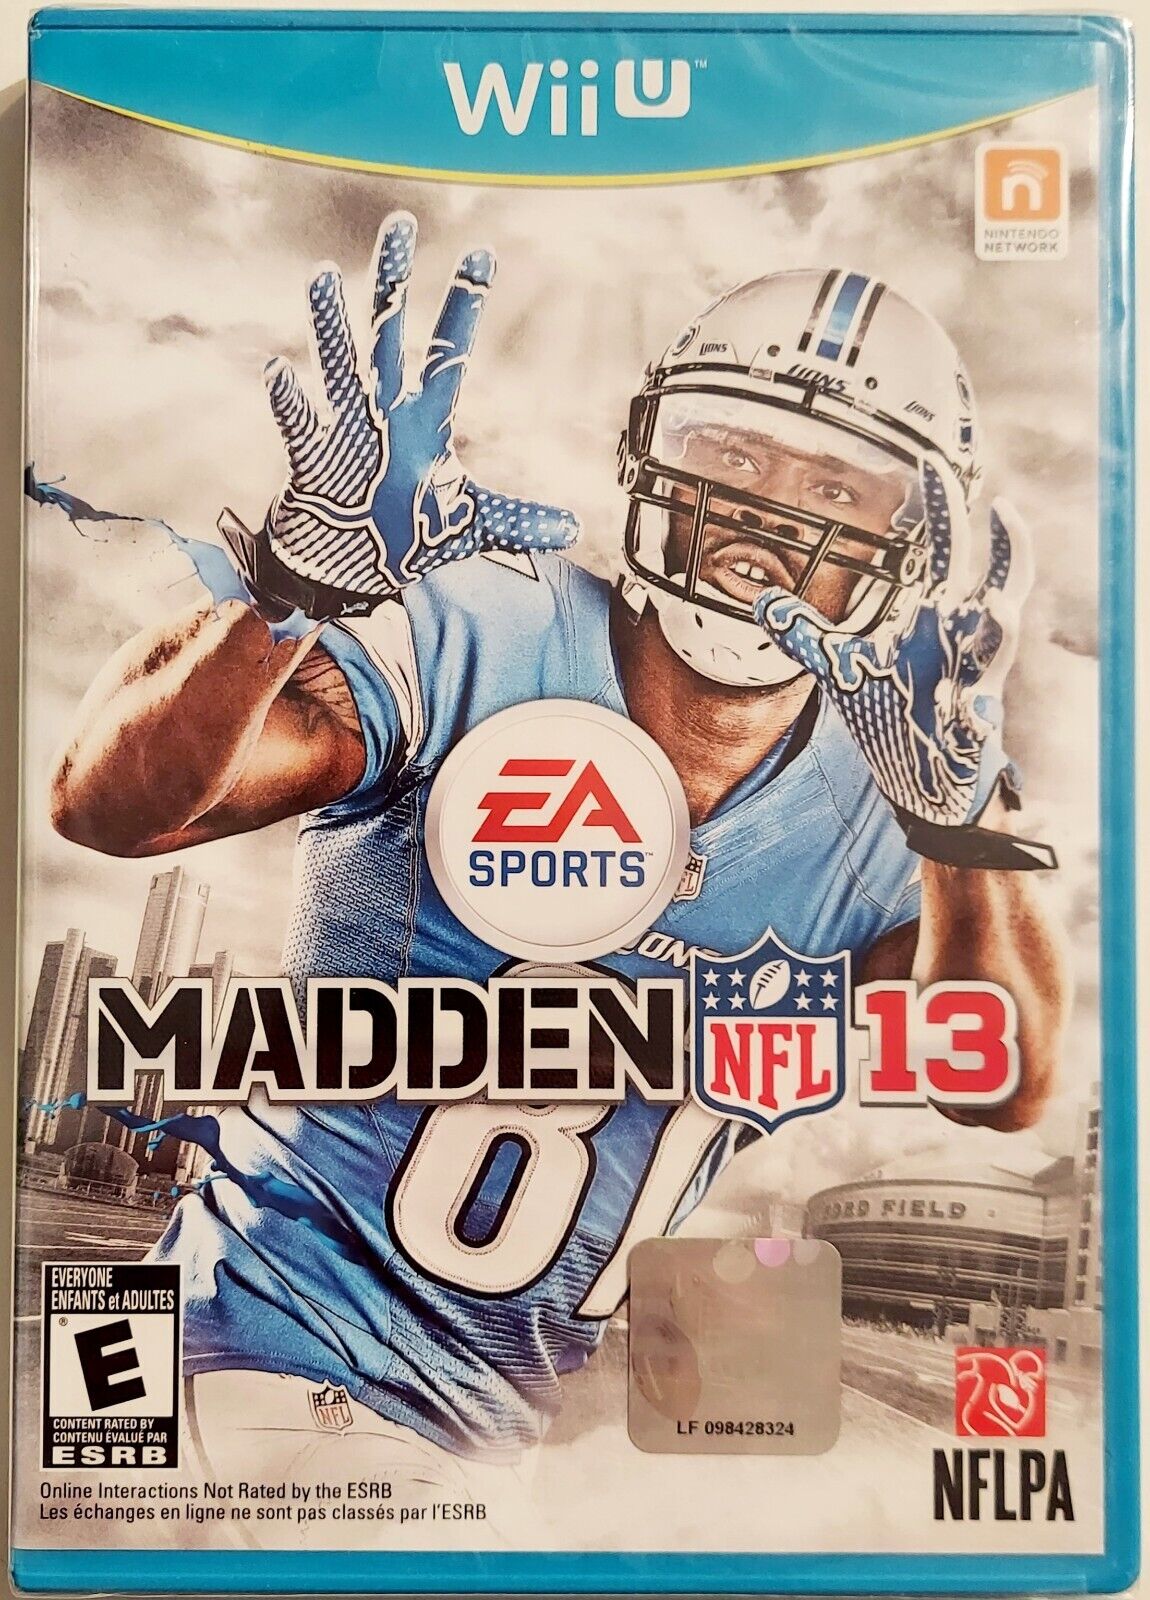 MADDEN NFL 13 NINTENDO Wii U BRAND NEW FACTORY SEALED FAST SHIPPING 